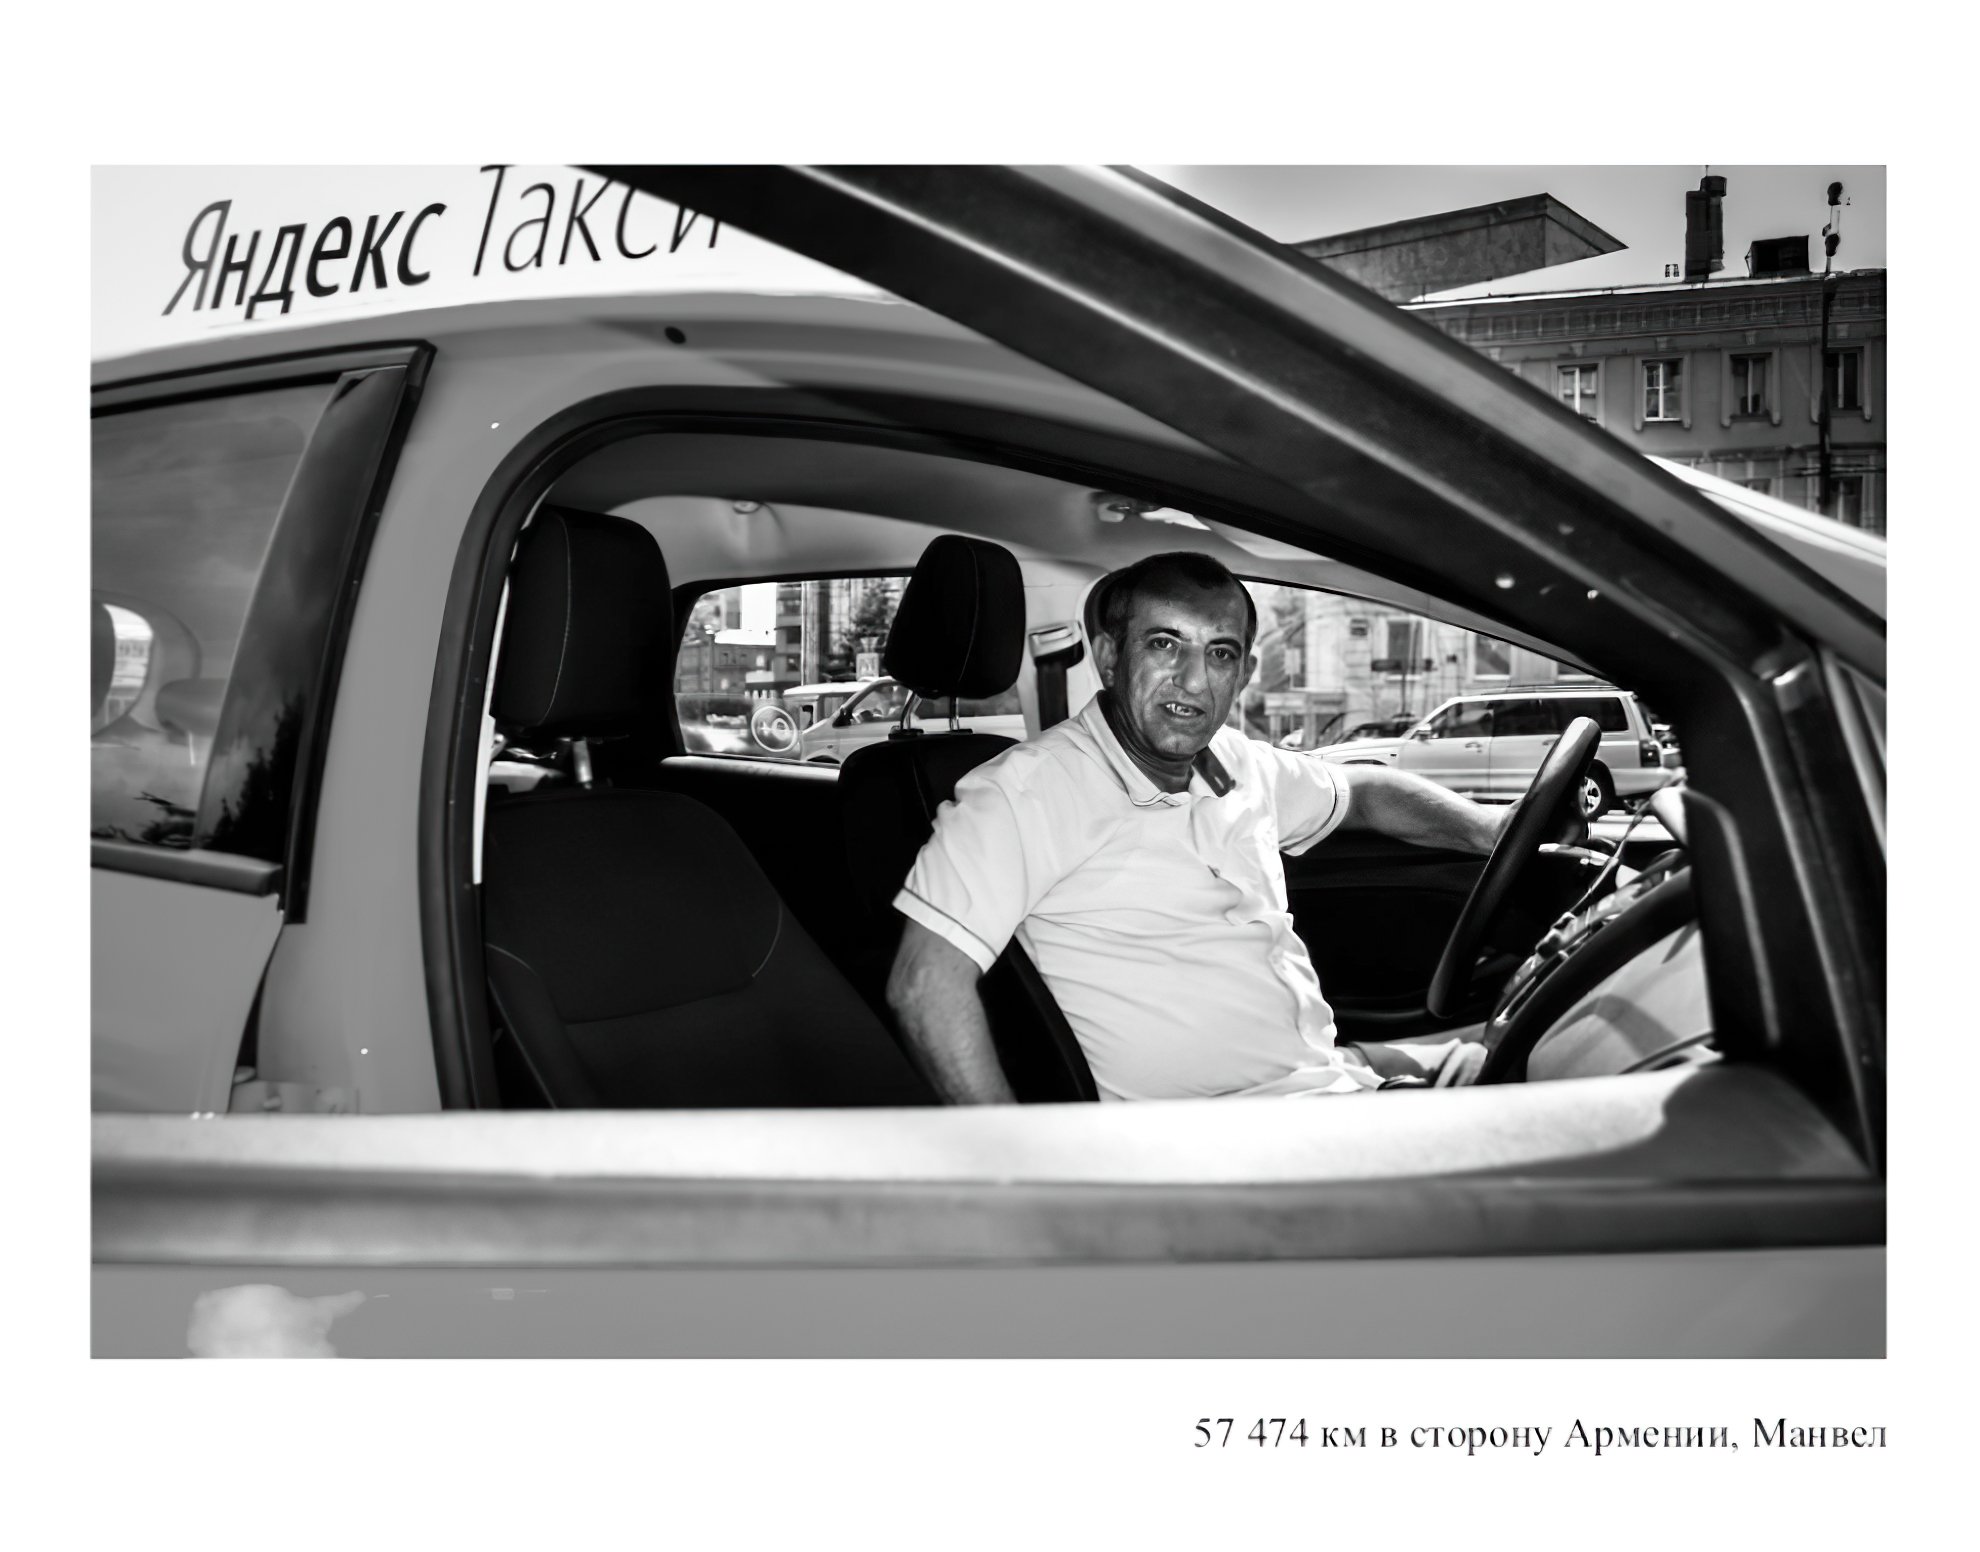 Road Home, 2016. This project is about the modern-day odyssey of Moscow’s cab drivers—an absurd journey where one has to travel 400,000 km to get back to the Caucasus that in fact are only 3,000 km away